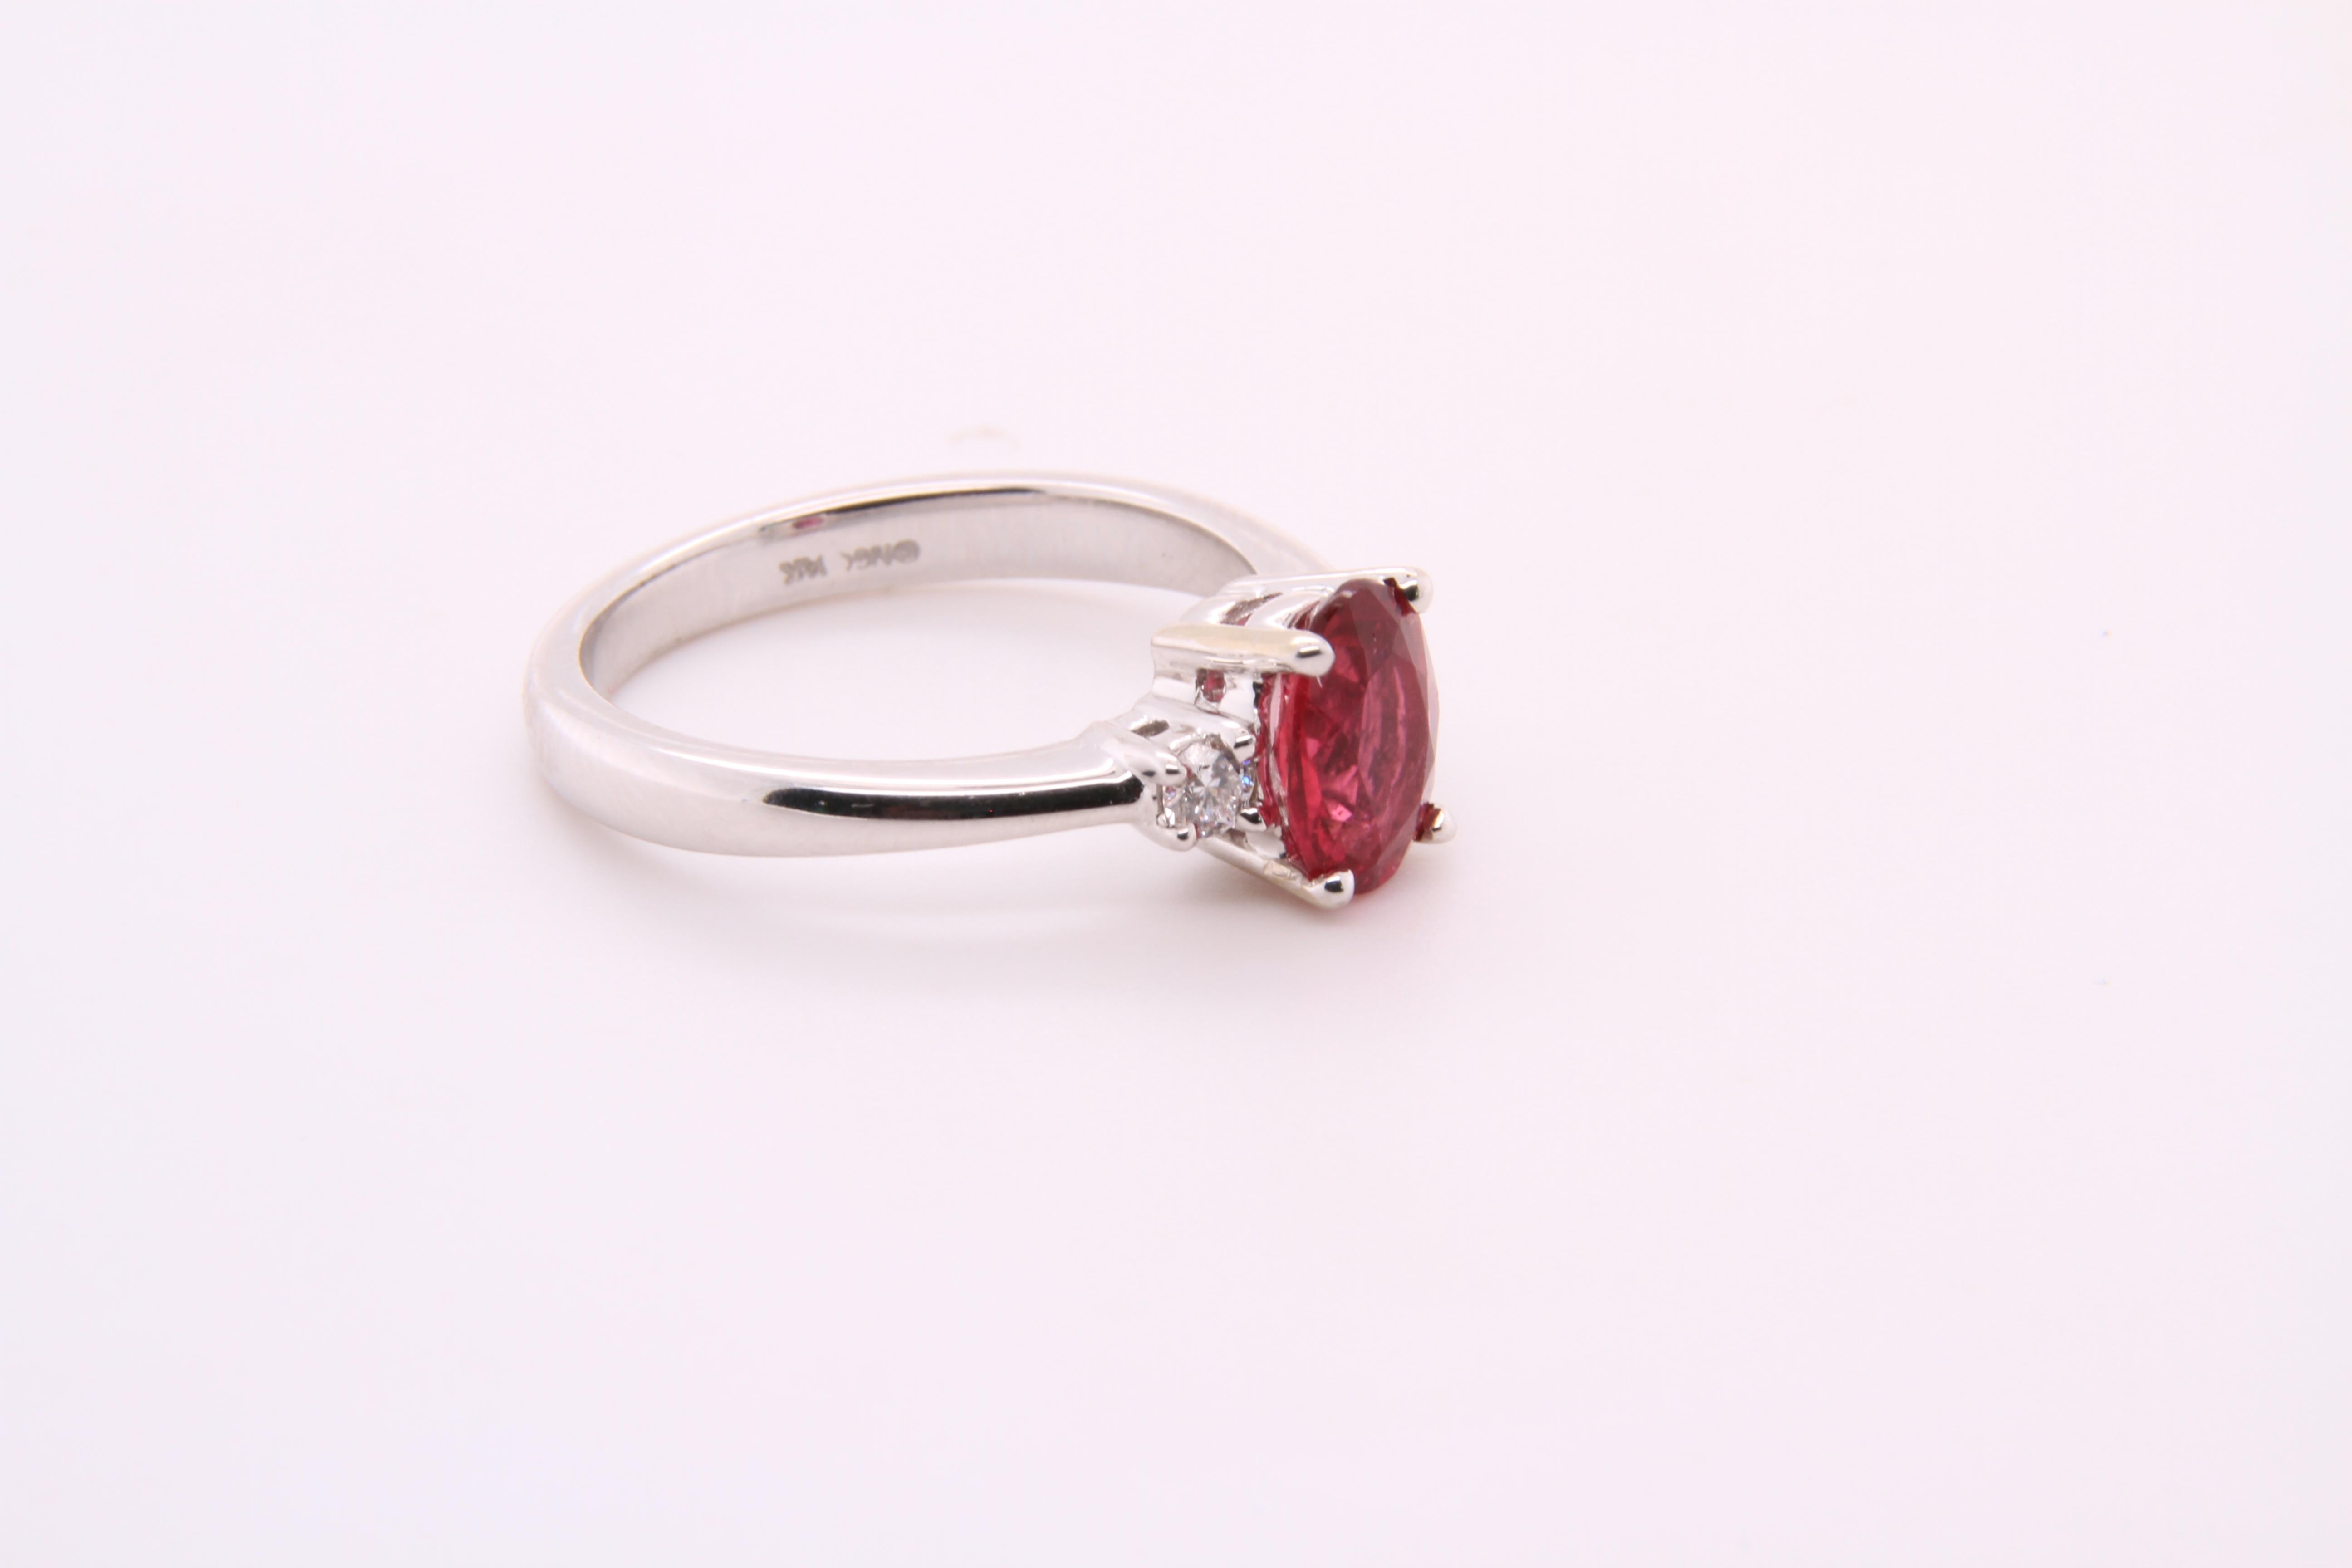 Bright, Pink, Oval Tourmaline Engagement Ring with Diamonds, 14K White Gold 3